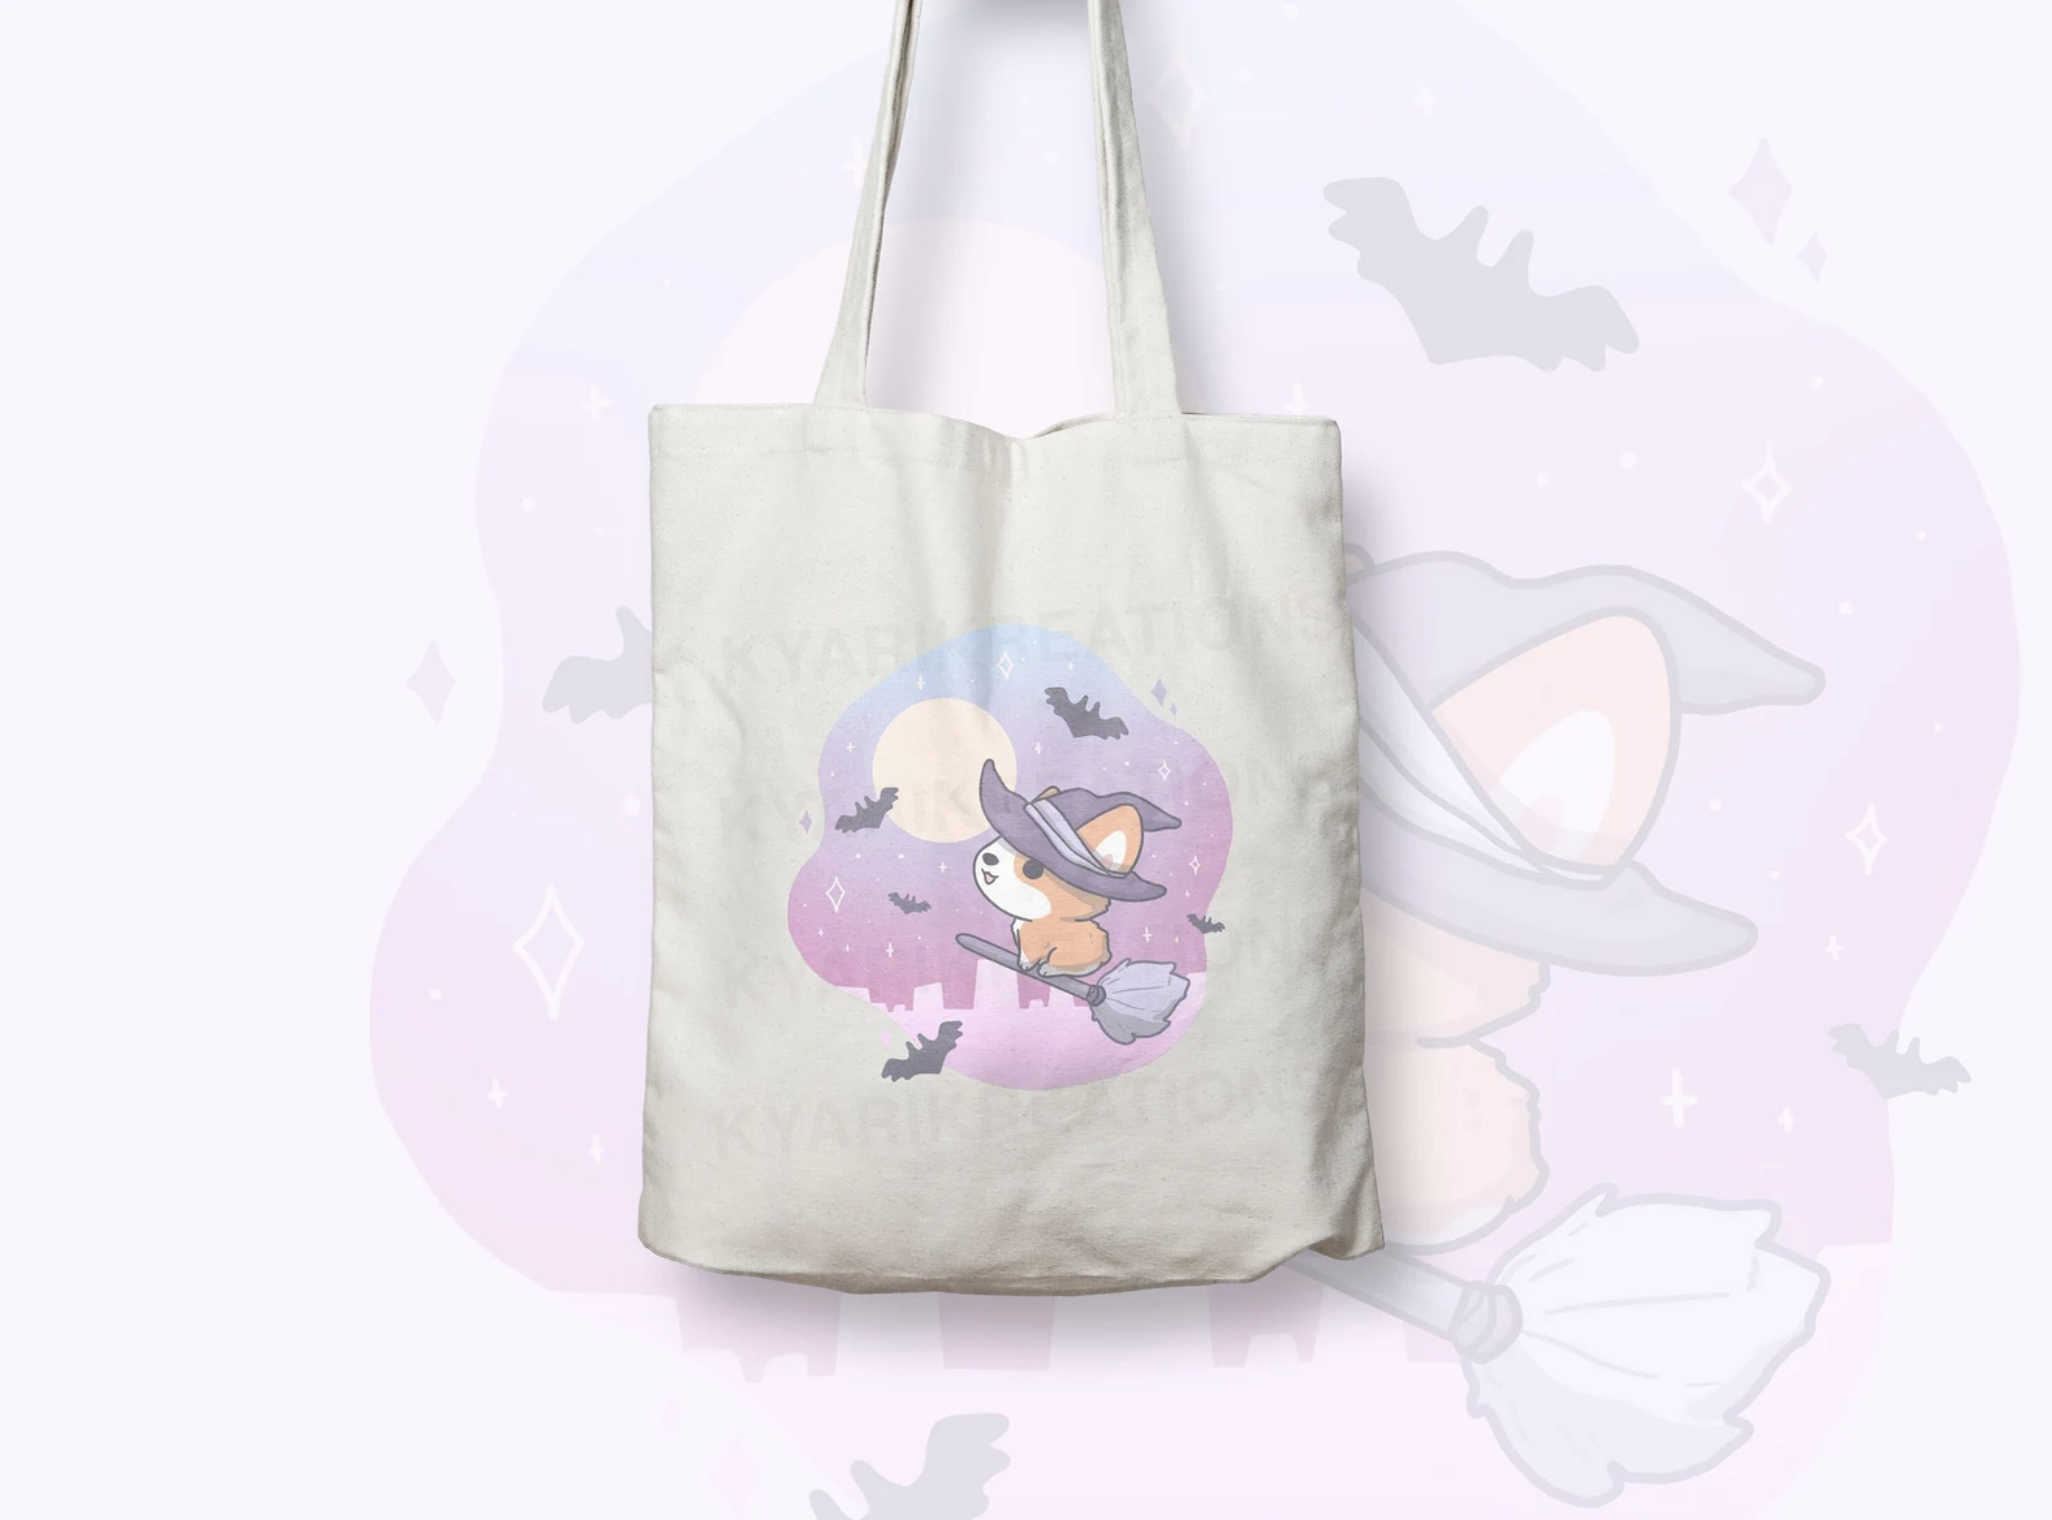 Cute corgi with witch hat flying in a blue-purple-pink gradient sky with bat friends